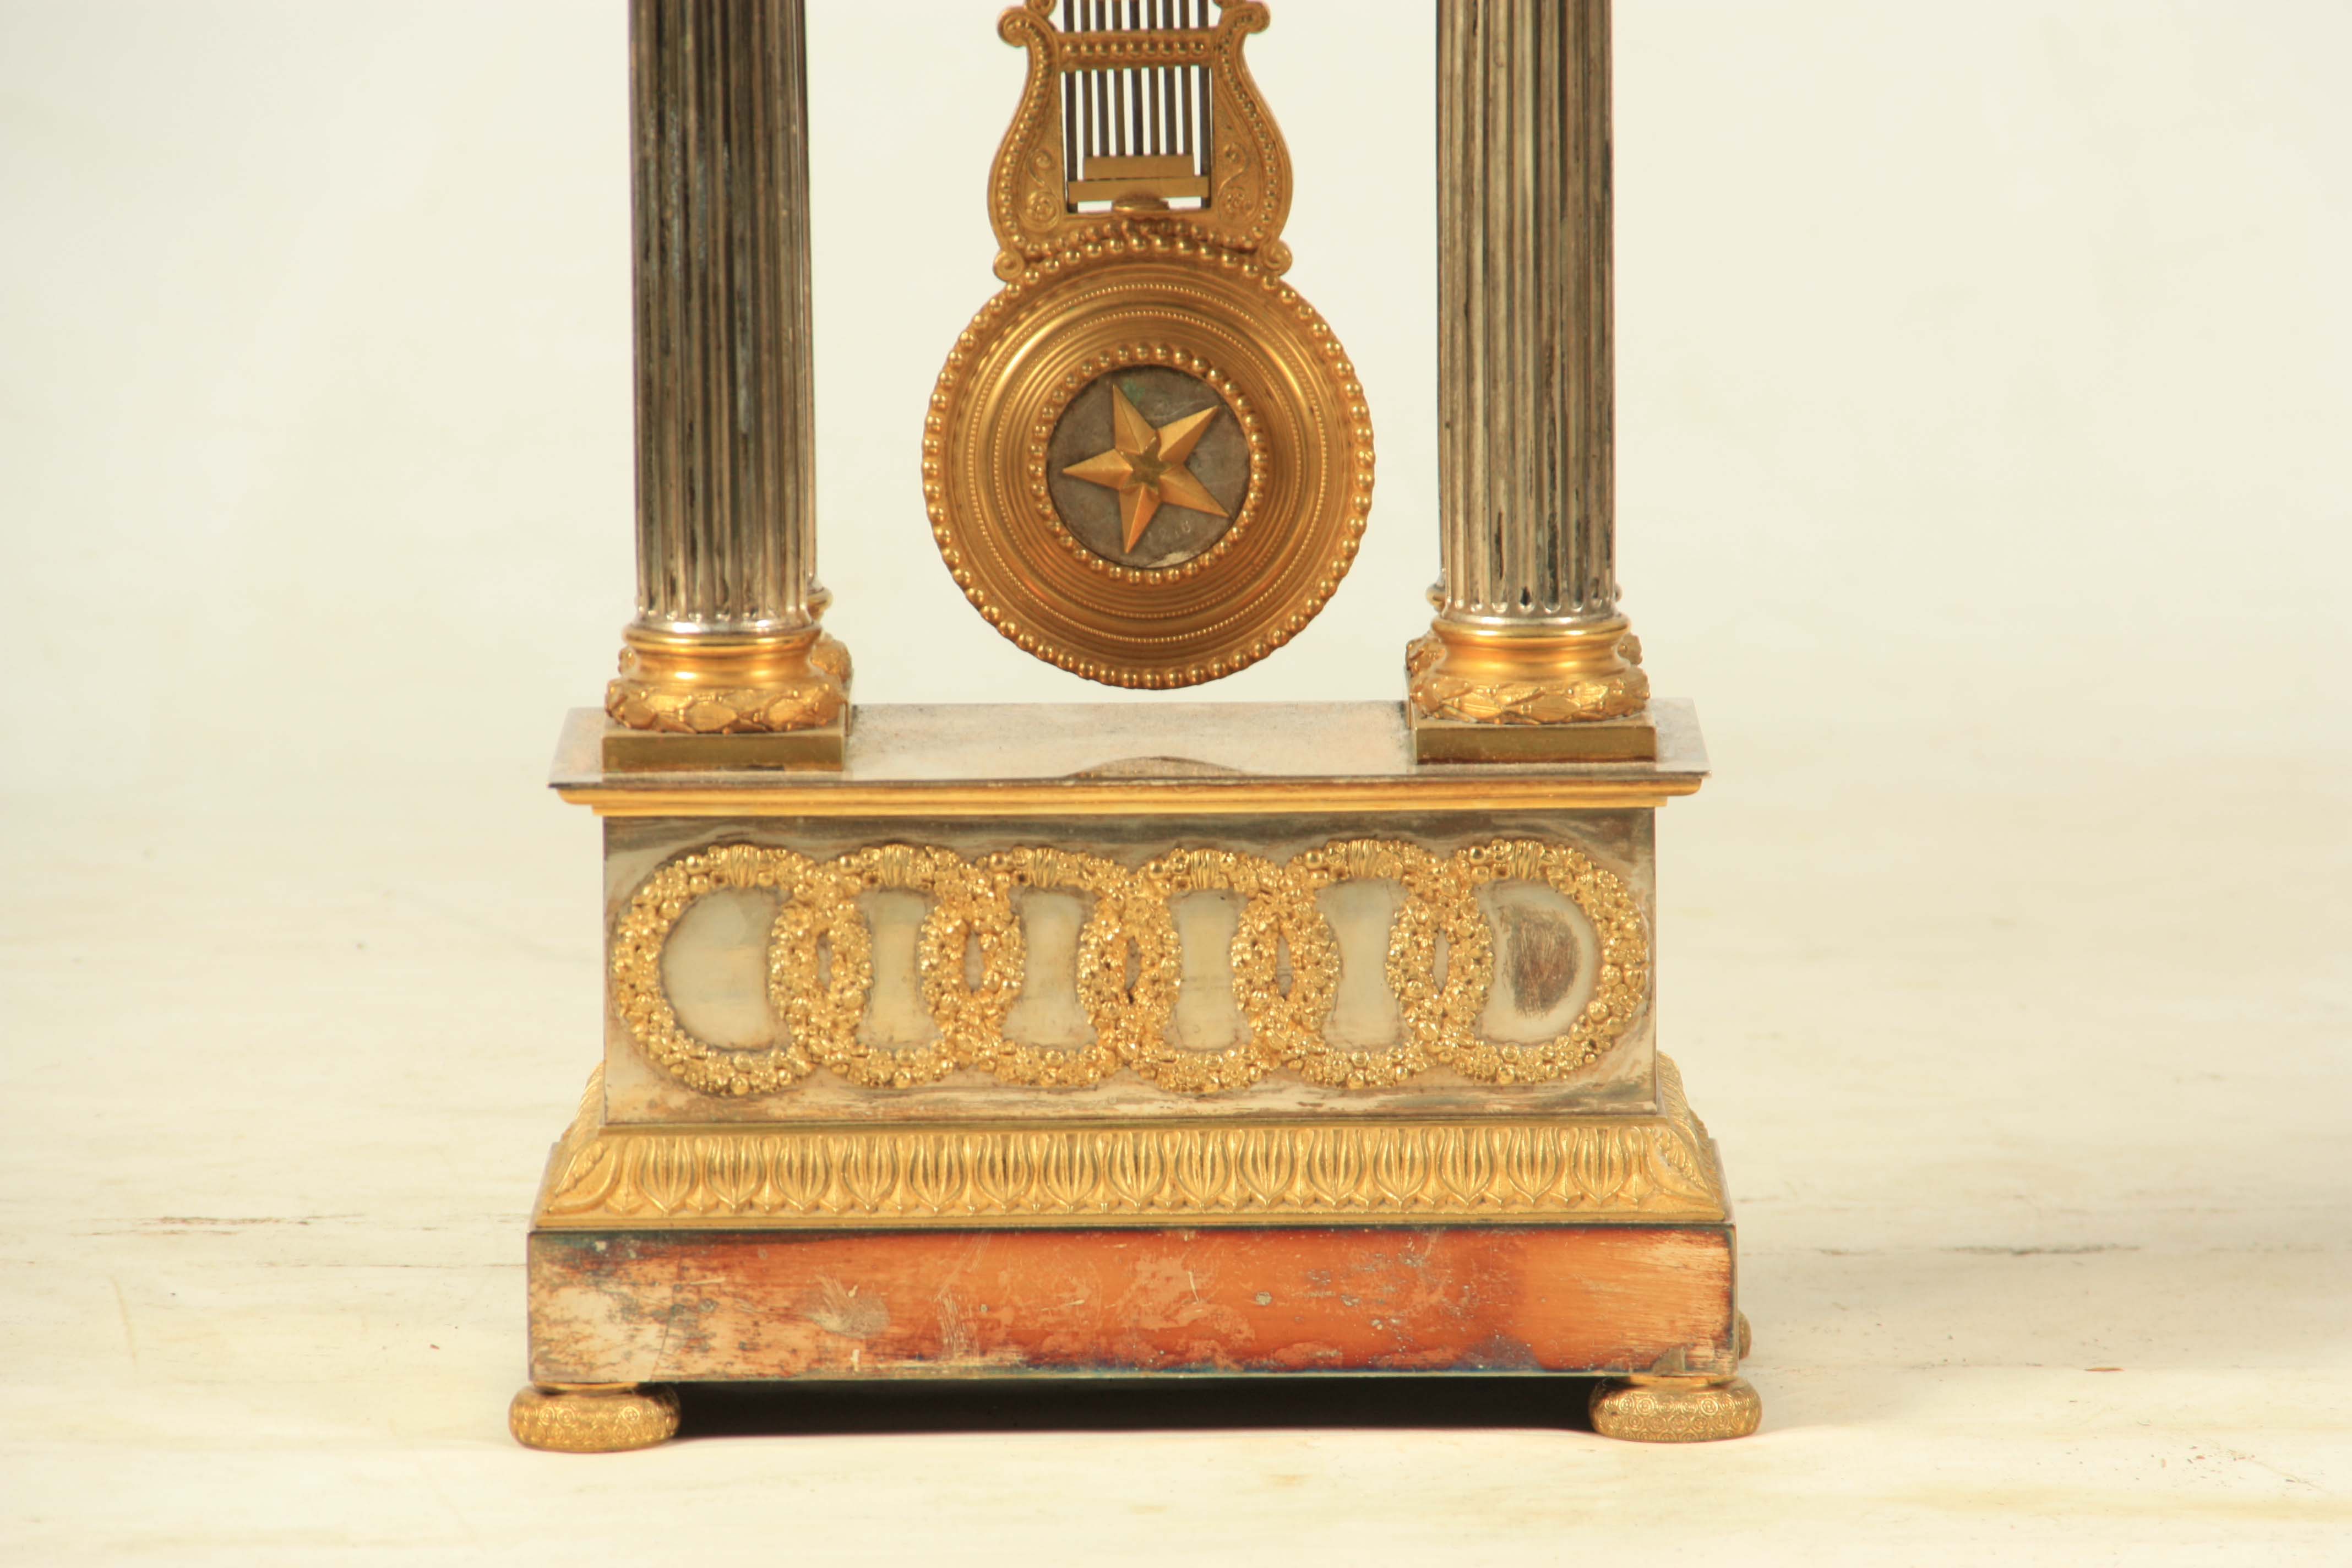 J.B. ROEMAET, A GRAND. A MID 19TH CENTURY FRENCH ORMOLU AND SILVERED PORTICO MANTEL CLOCK the case - Image 2 of 6